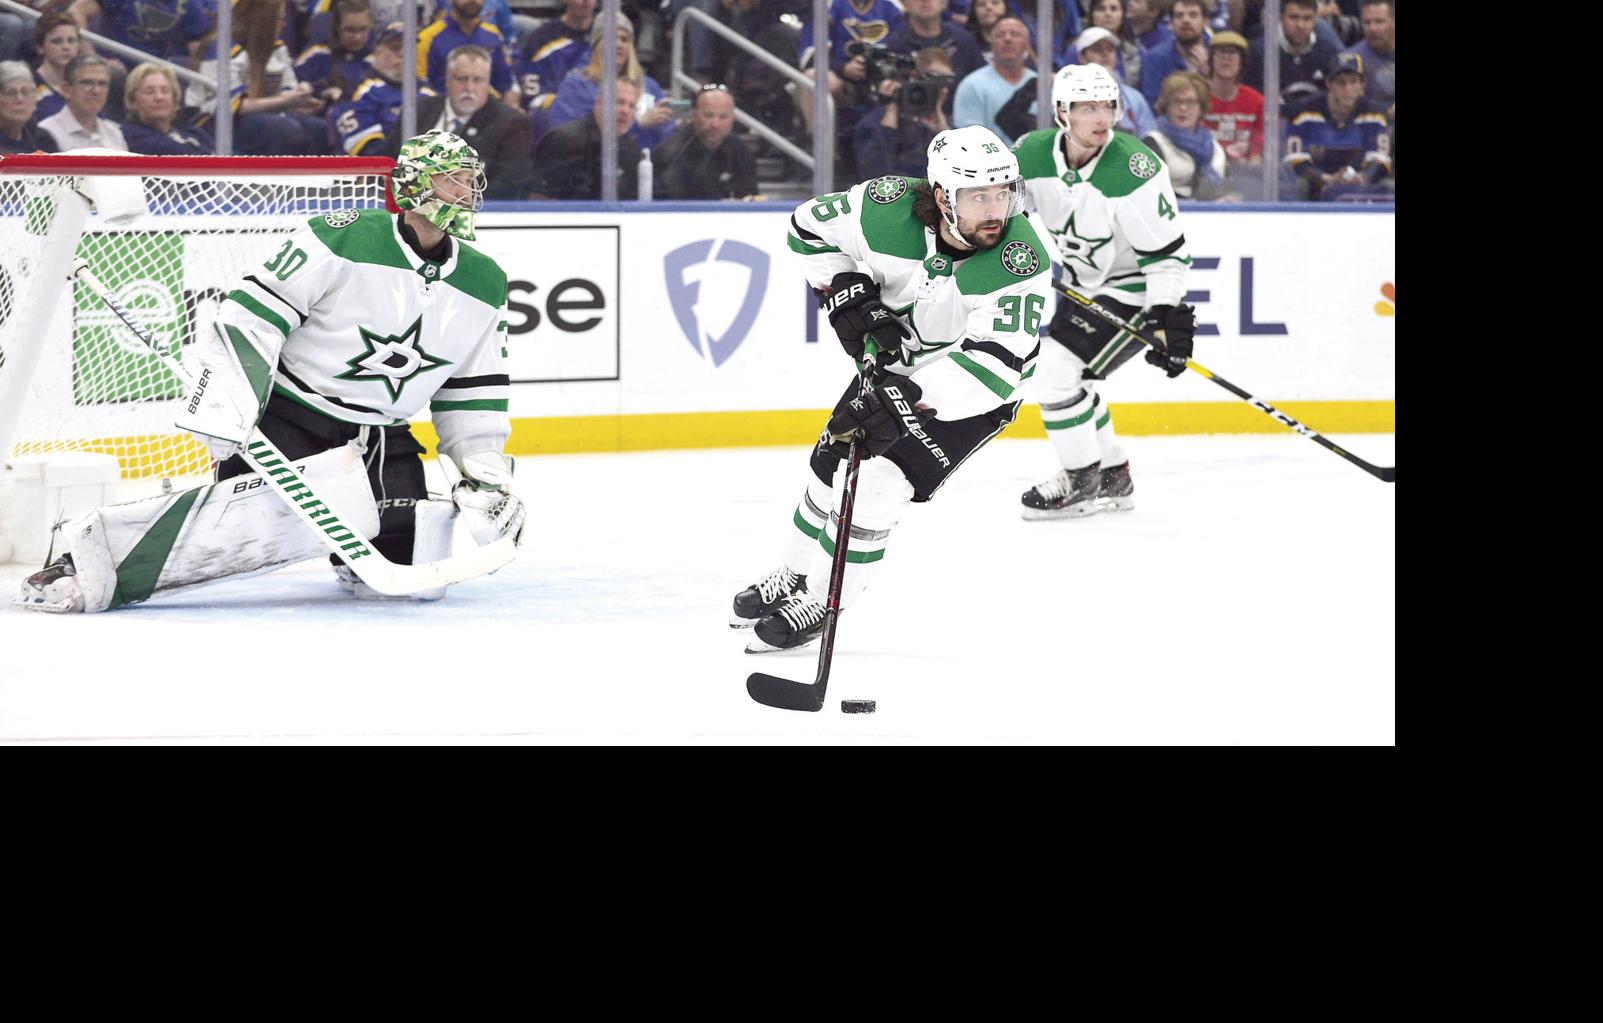 After earlier signing Mats Zuccarello, the Wild have added another